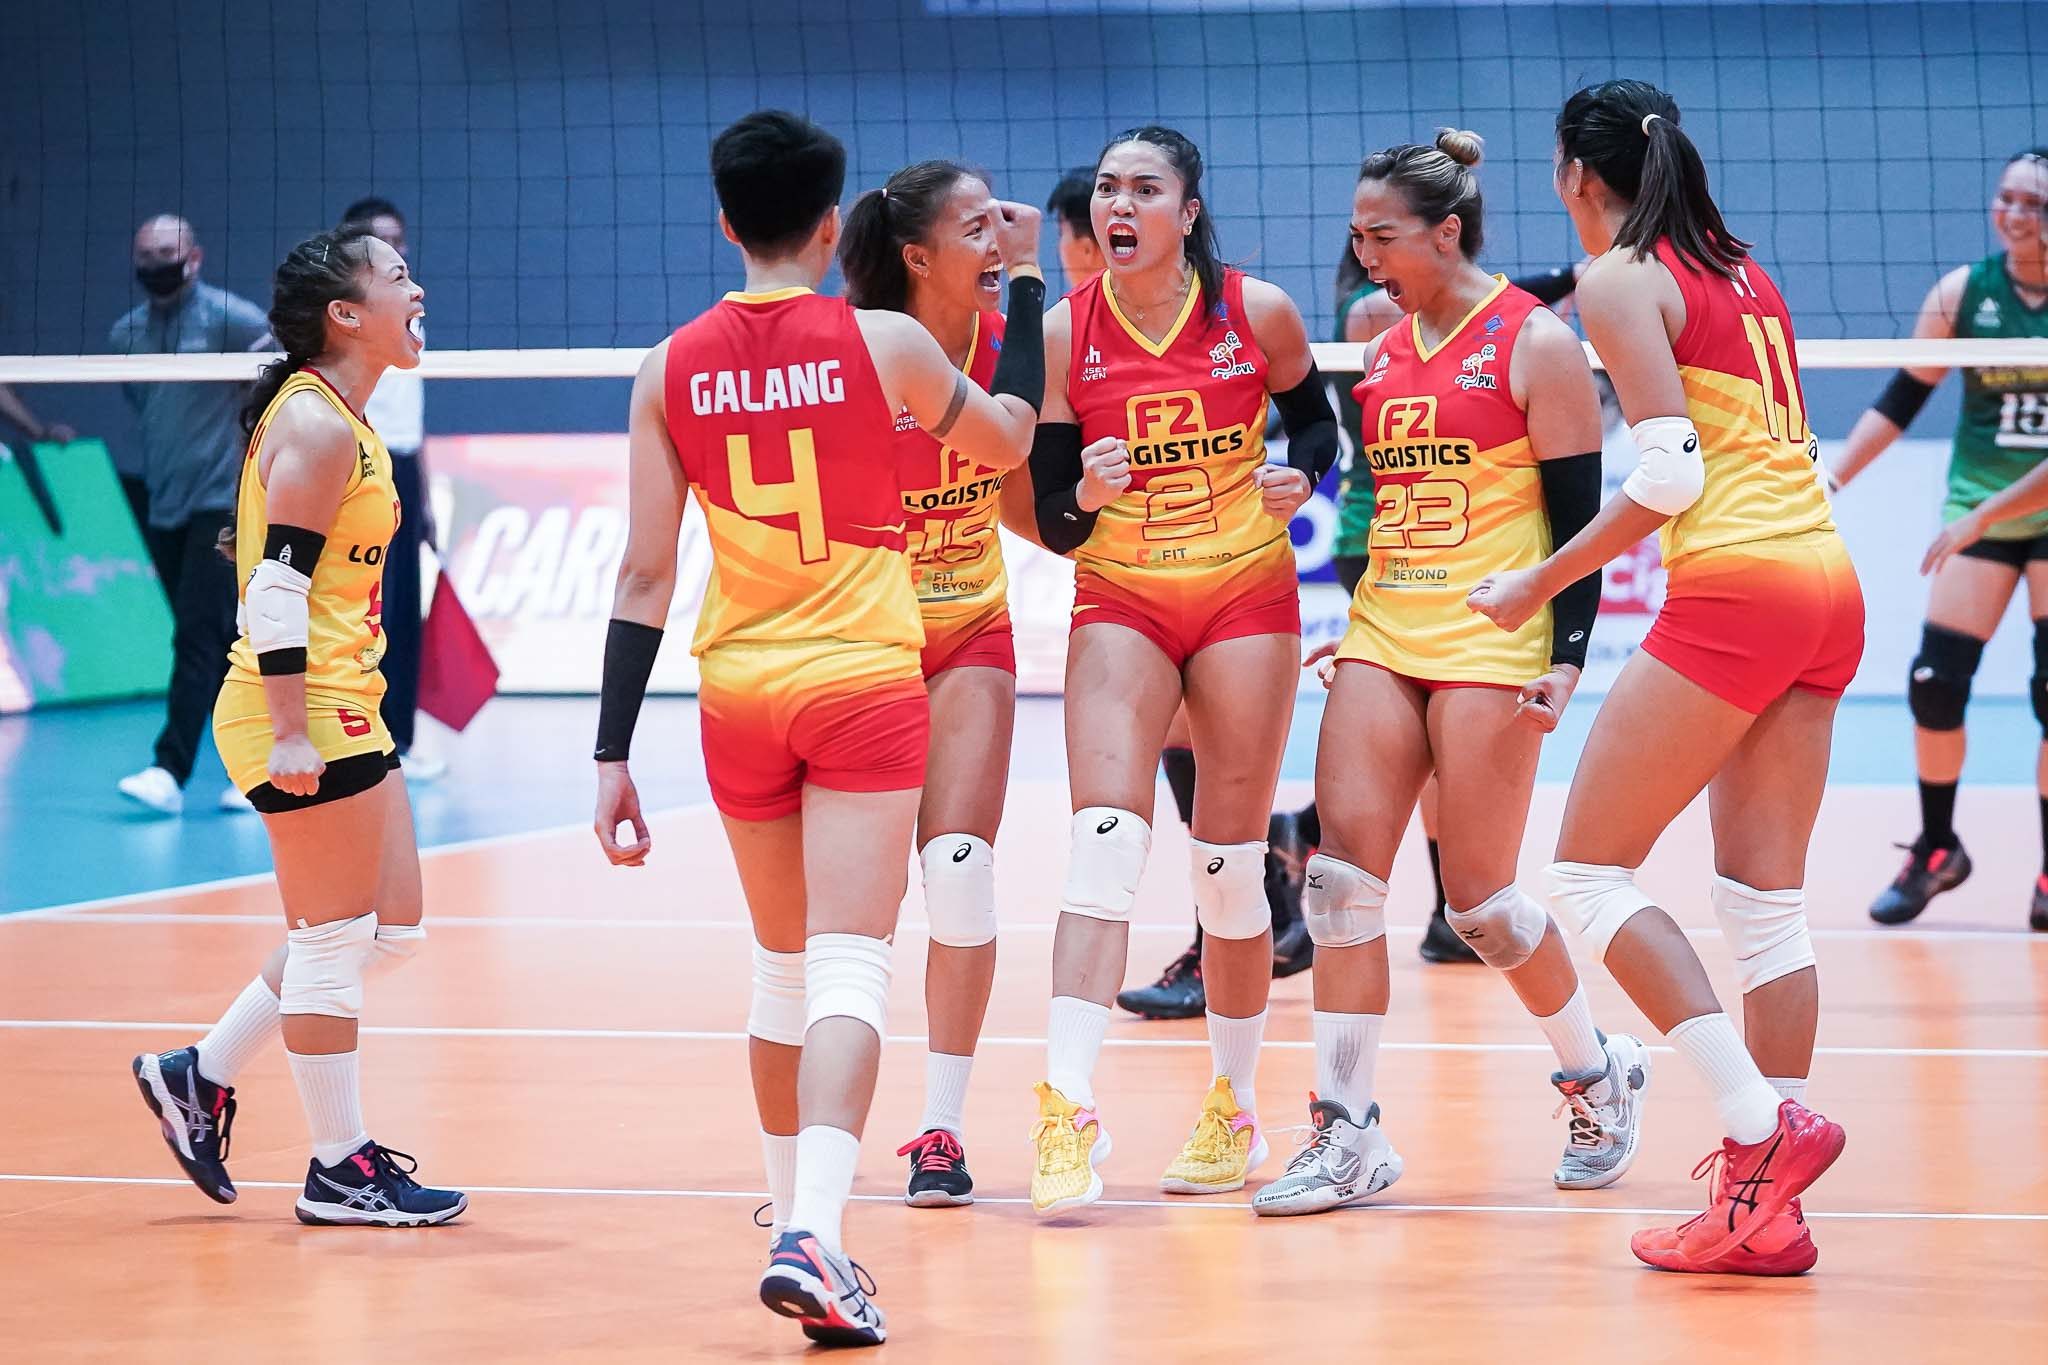 F2 Logistics complete rousing PVL debut, down Army-Black Mamba in 4 sets